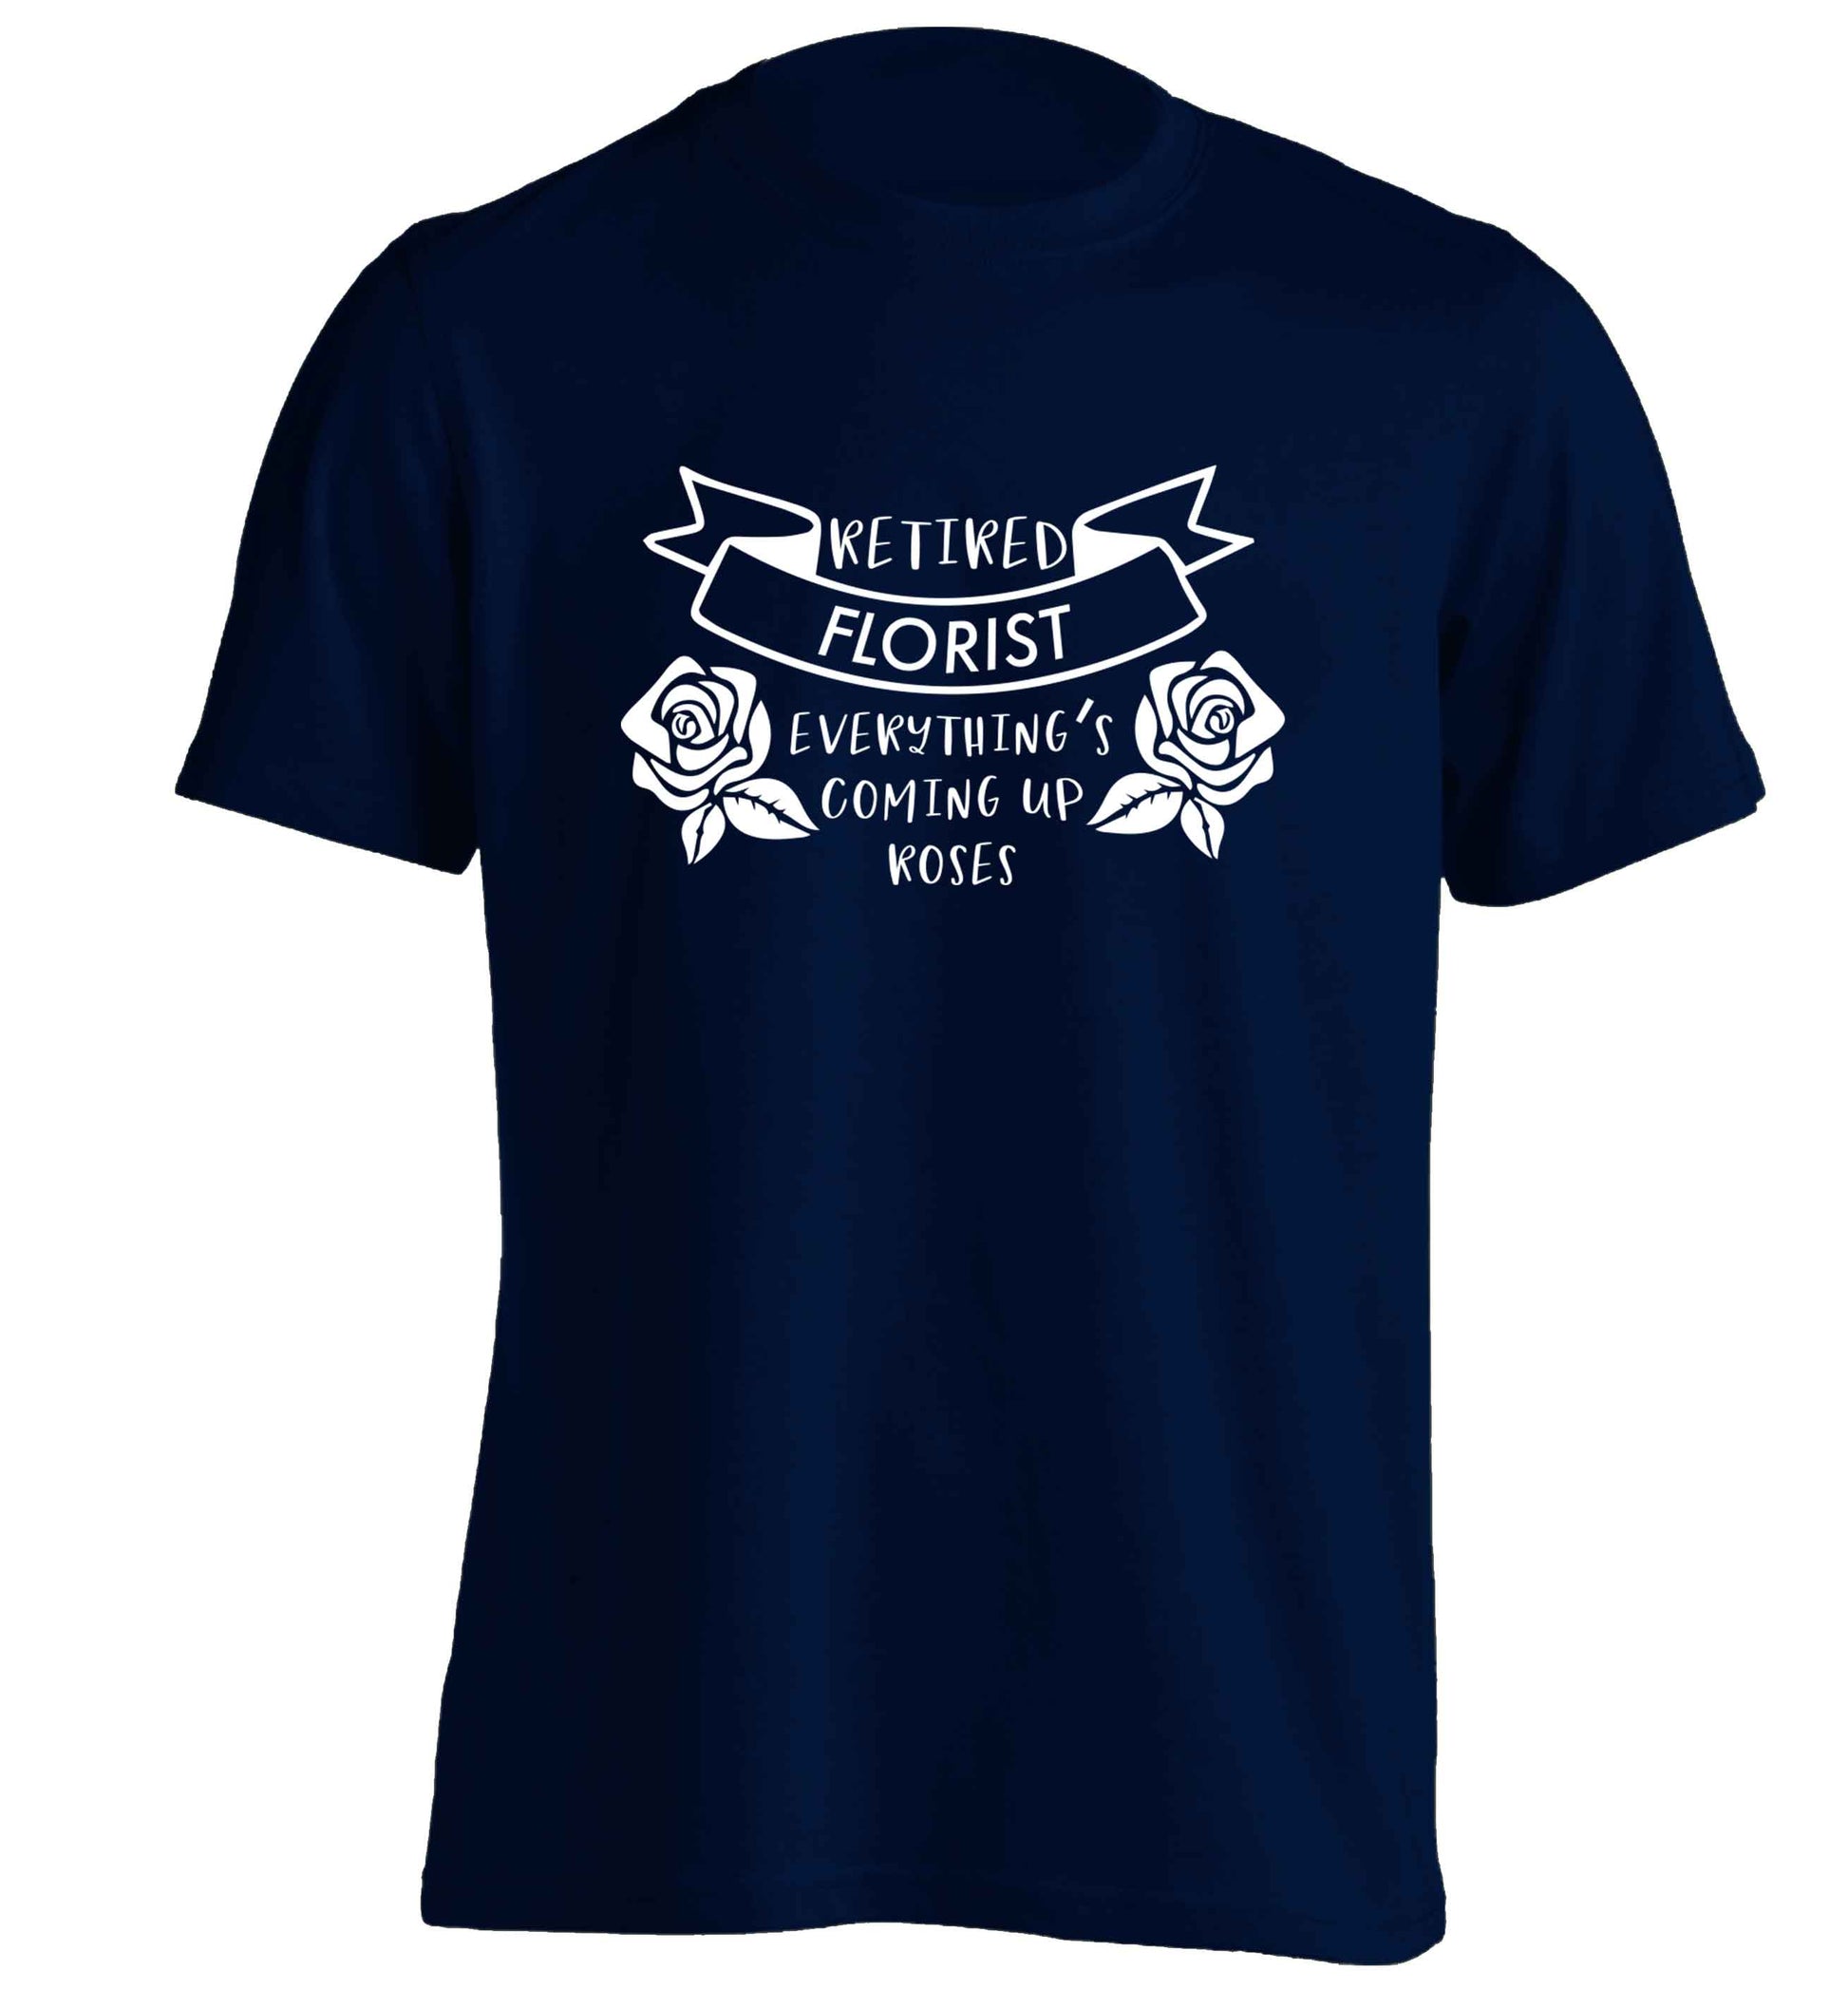 Retired florist everything's coming up roses adults unisex navy Tshirt 2XL